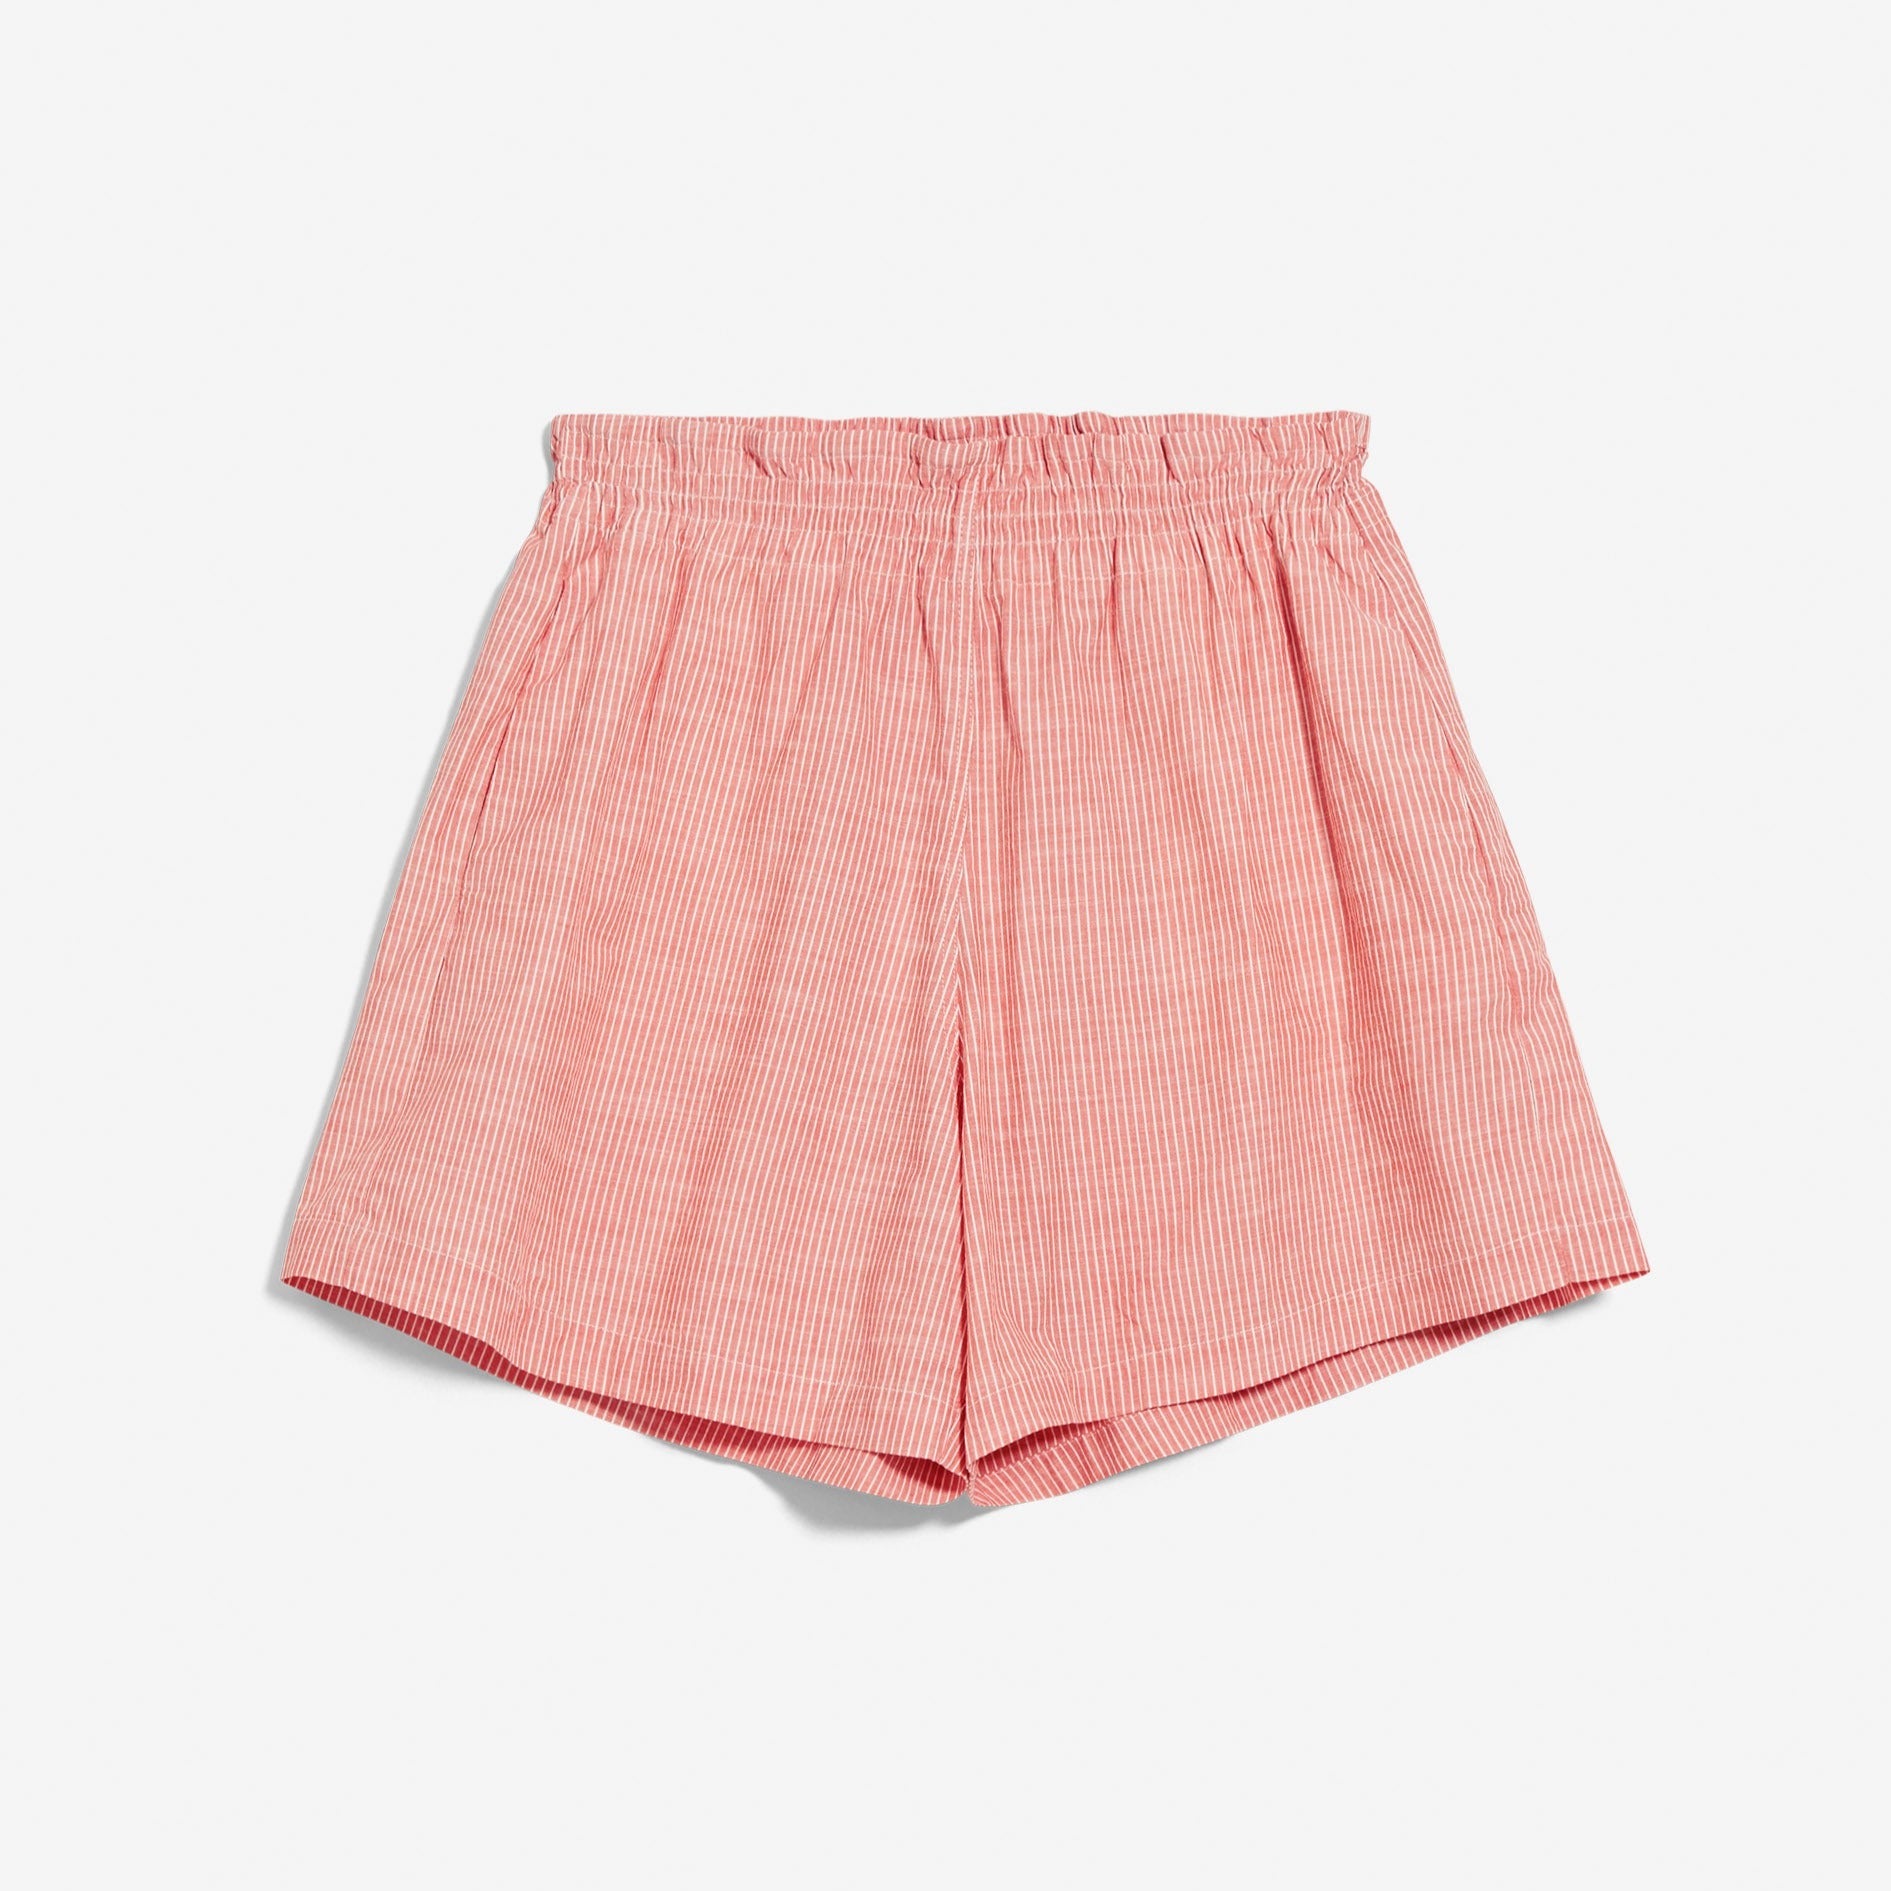 ARMEDANGELS Shorts "MELORAA STRIPES" - hibiscus-off white